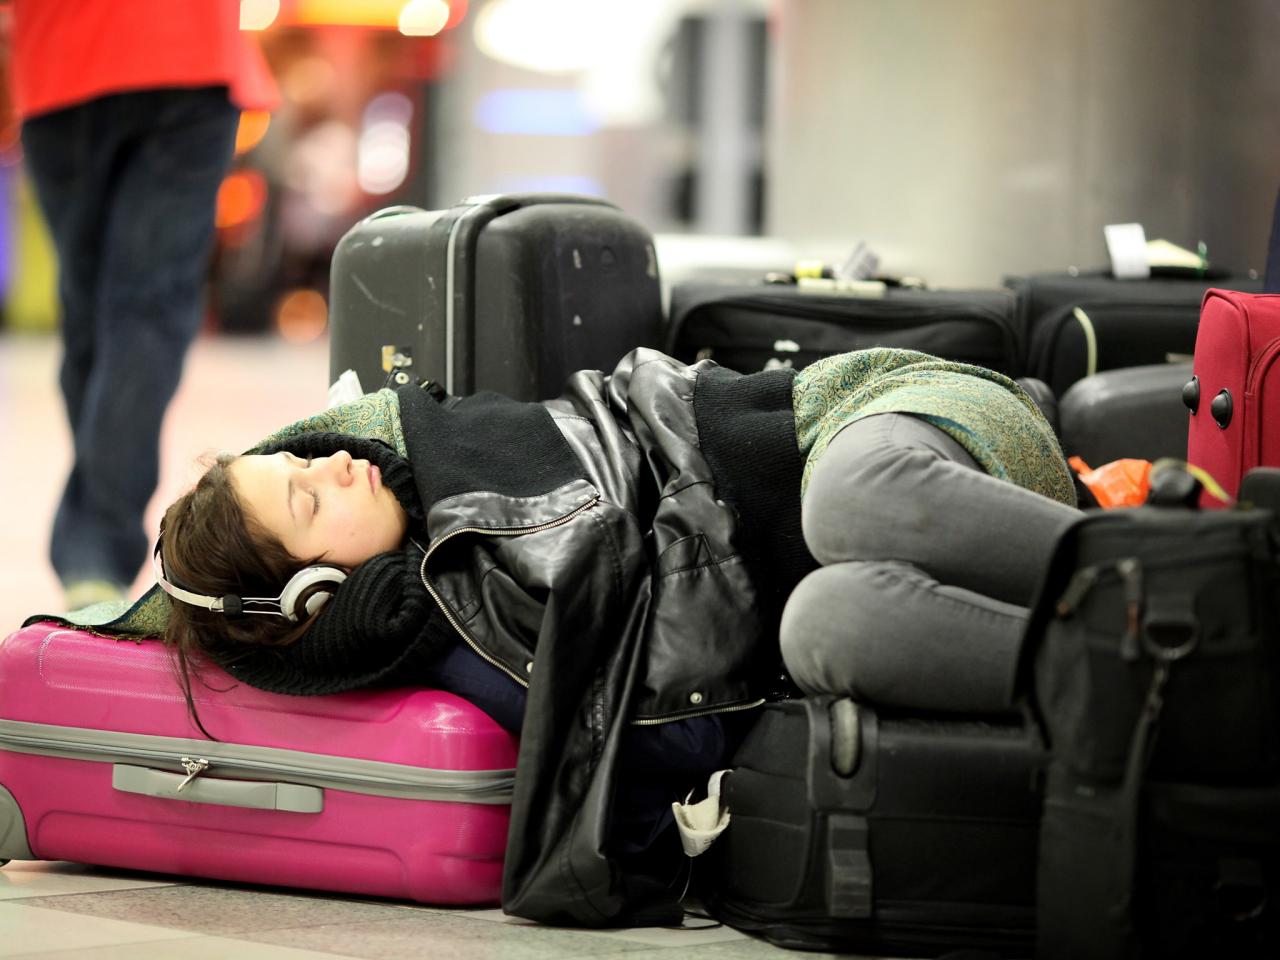 Day in a GM's life: Sleeping at airports, non-stop travel